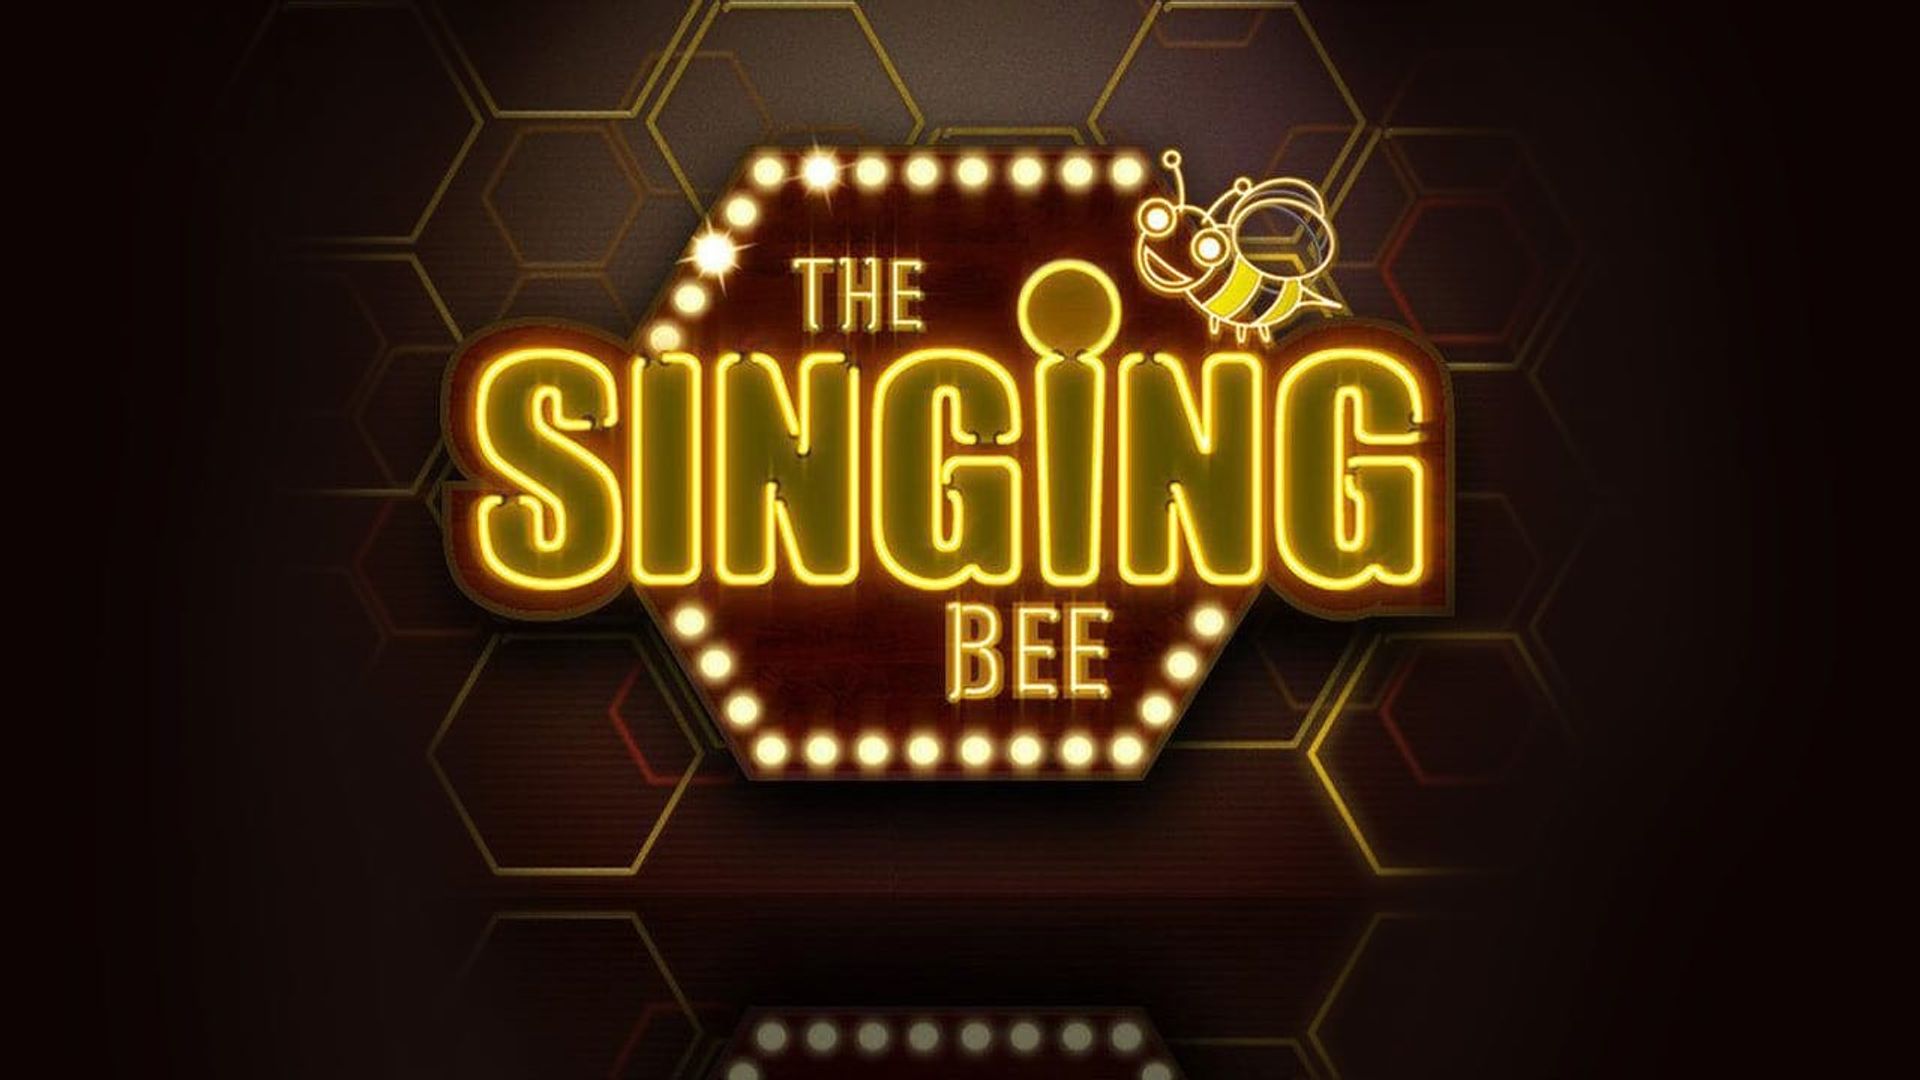 The Singing Bee background